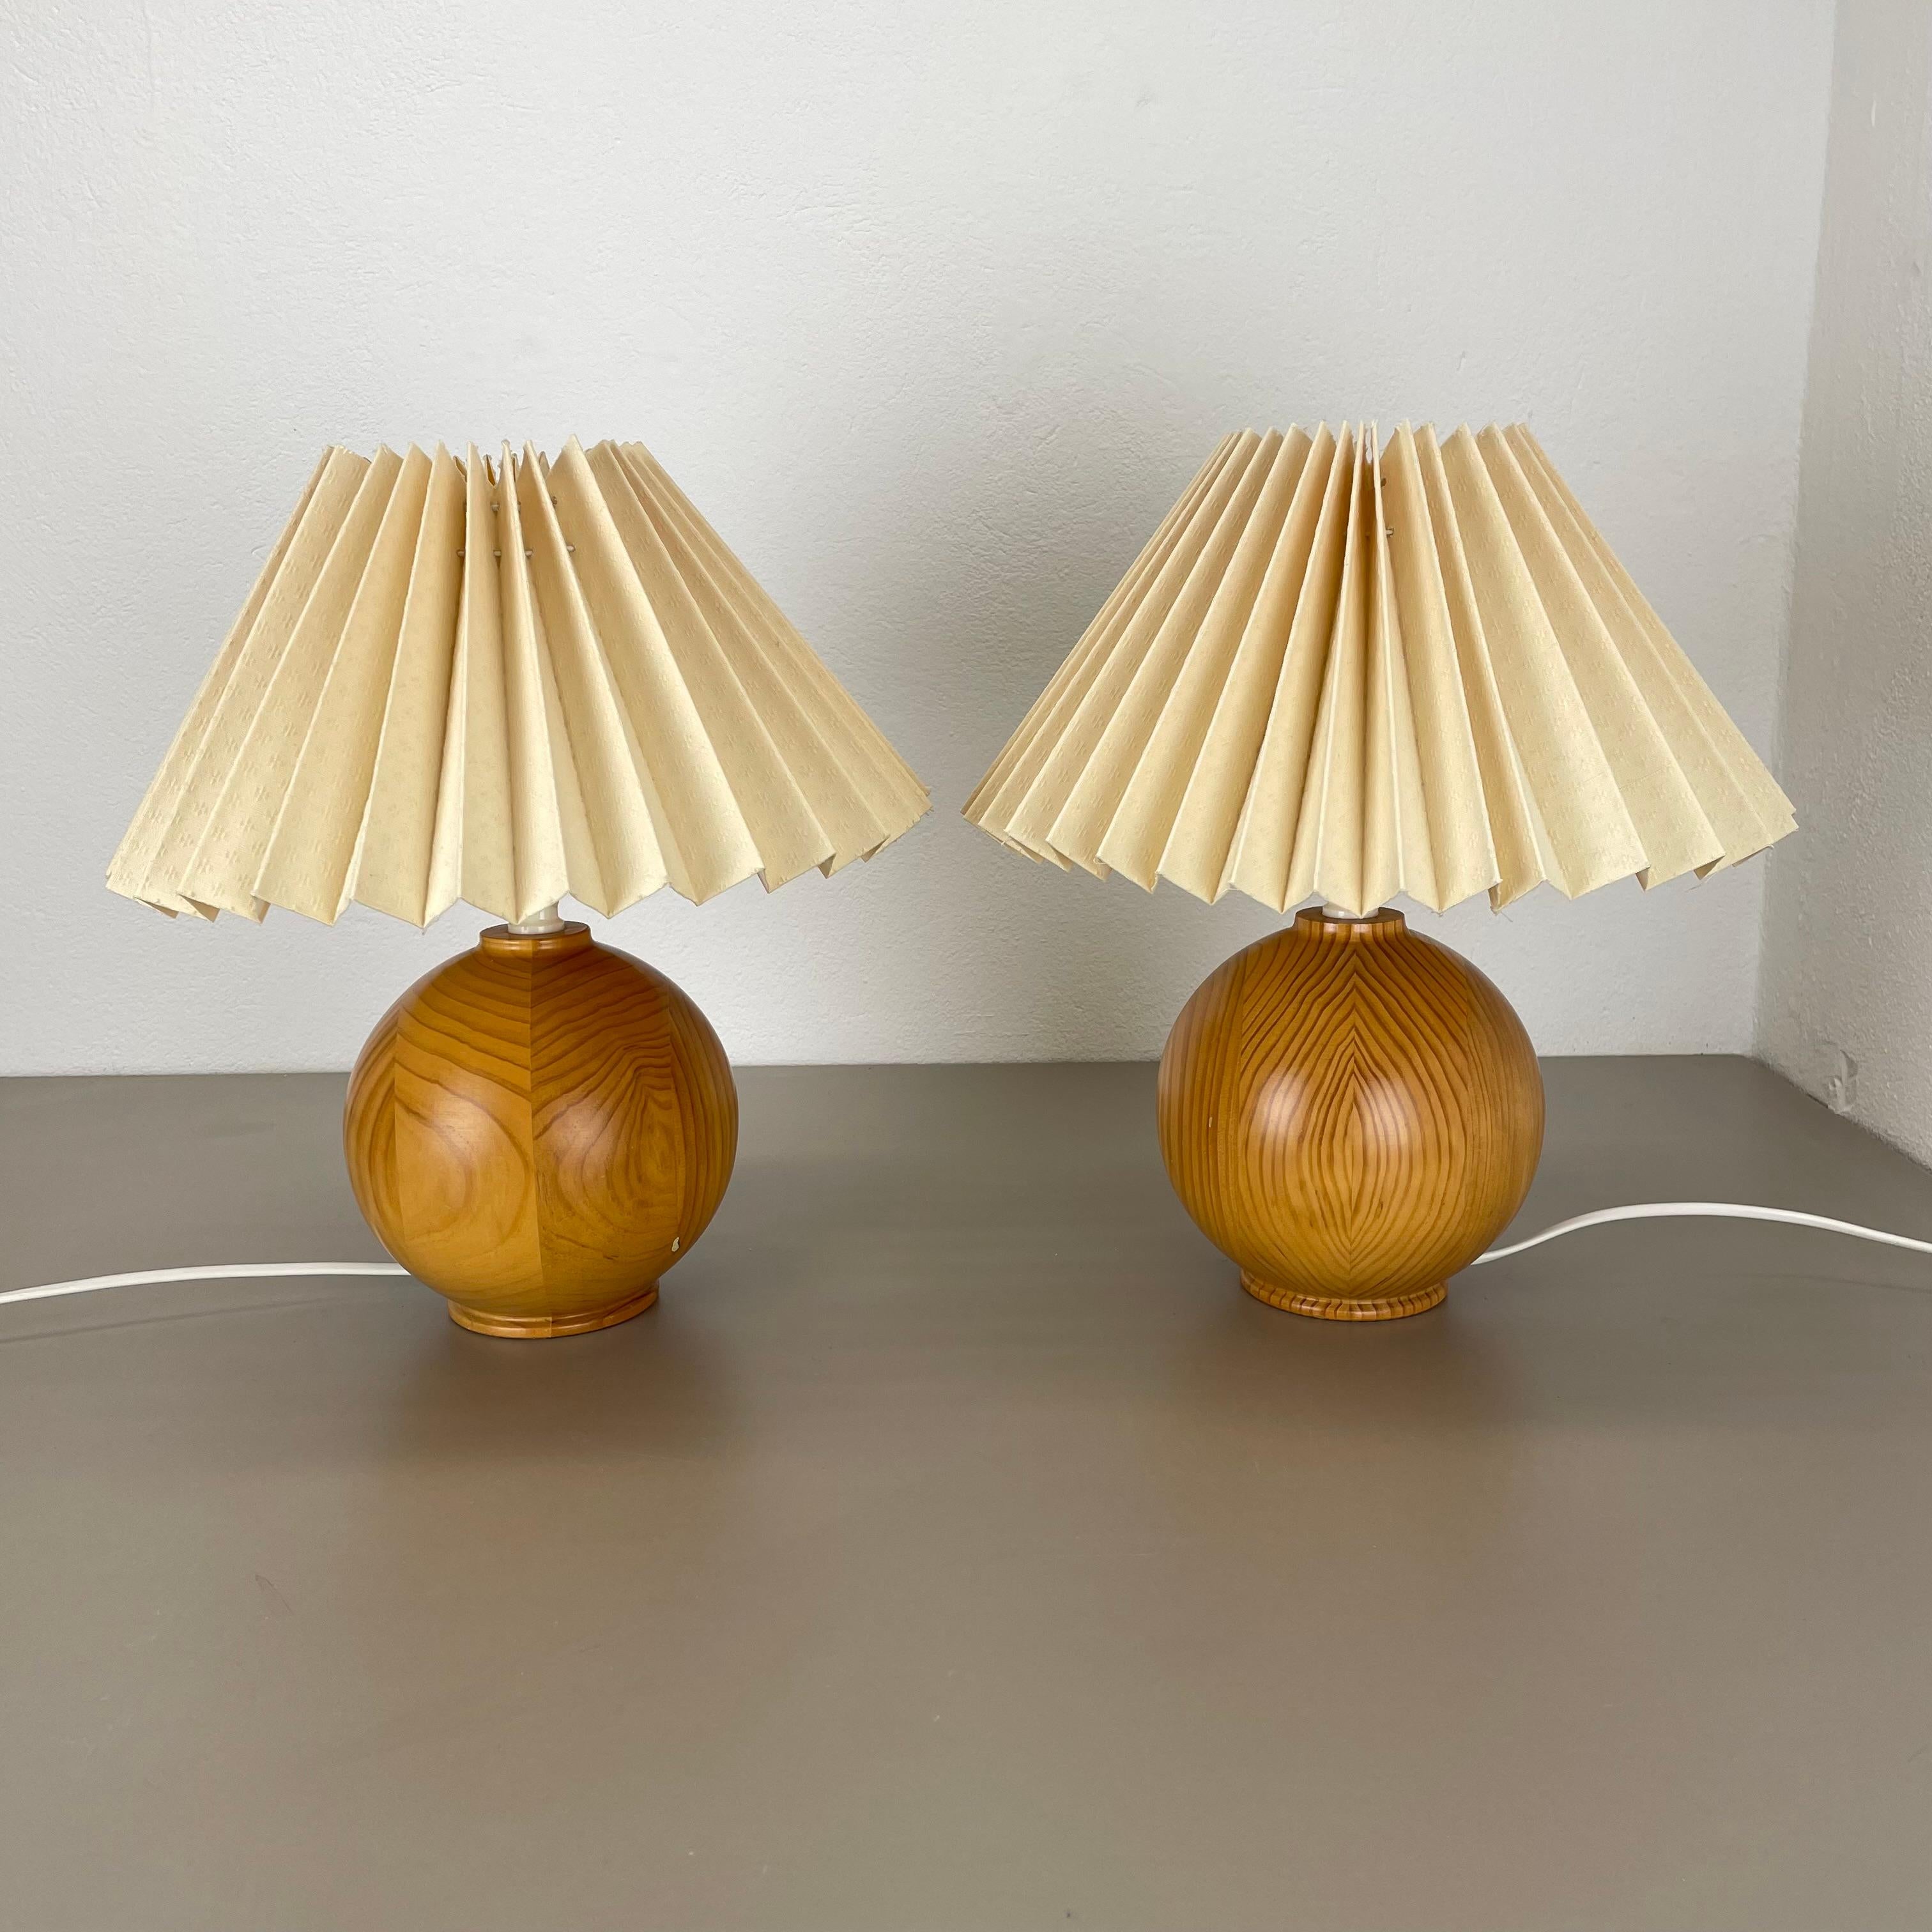 Article:

Table light, set of 2


Design:

in style of Pierre Chapo and Charlotte Perriand


Origin: 

Sweden


Age: 

1970s


Description: 

This fantastic table light set was designed and produced in 1970s in Sweden.

the base of this unique